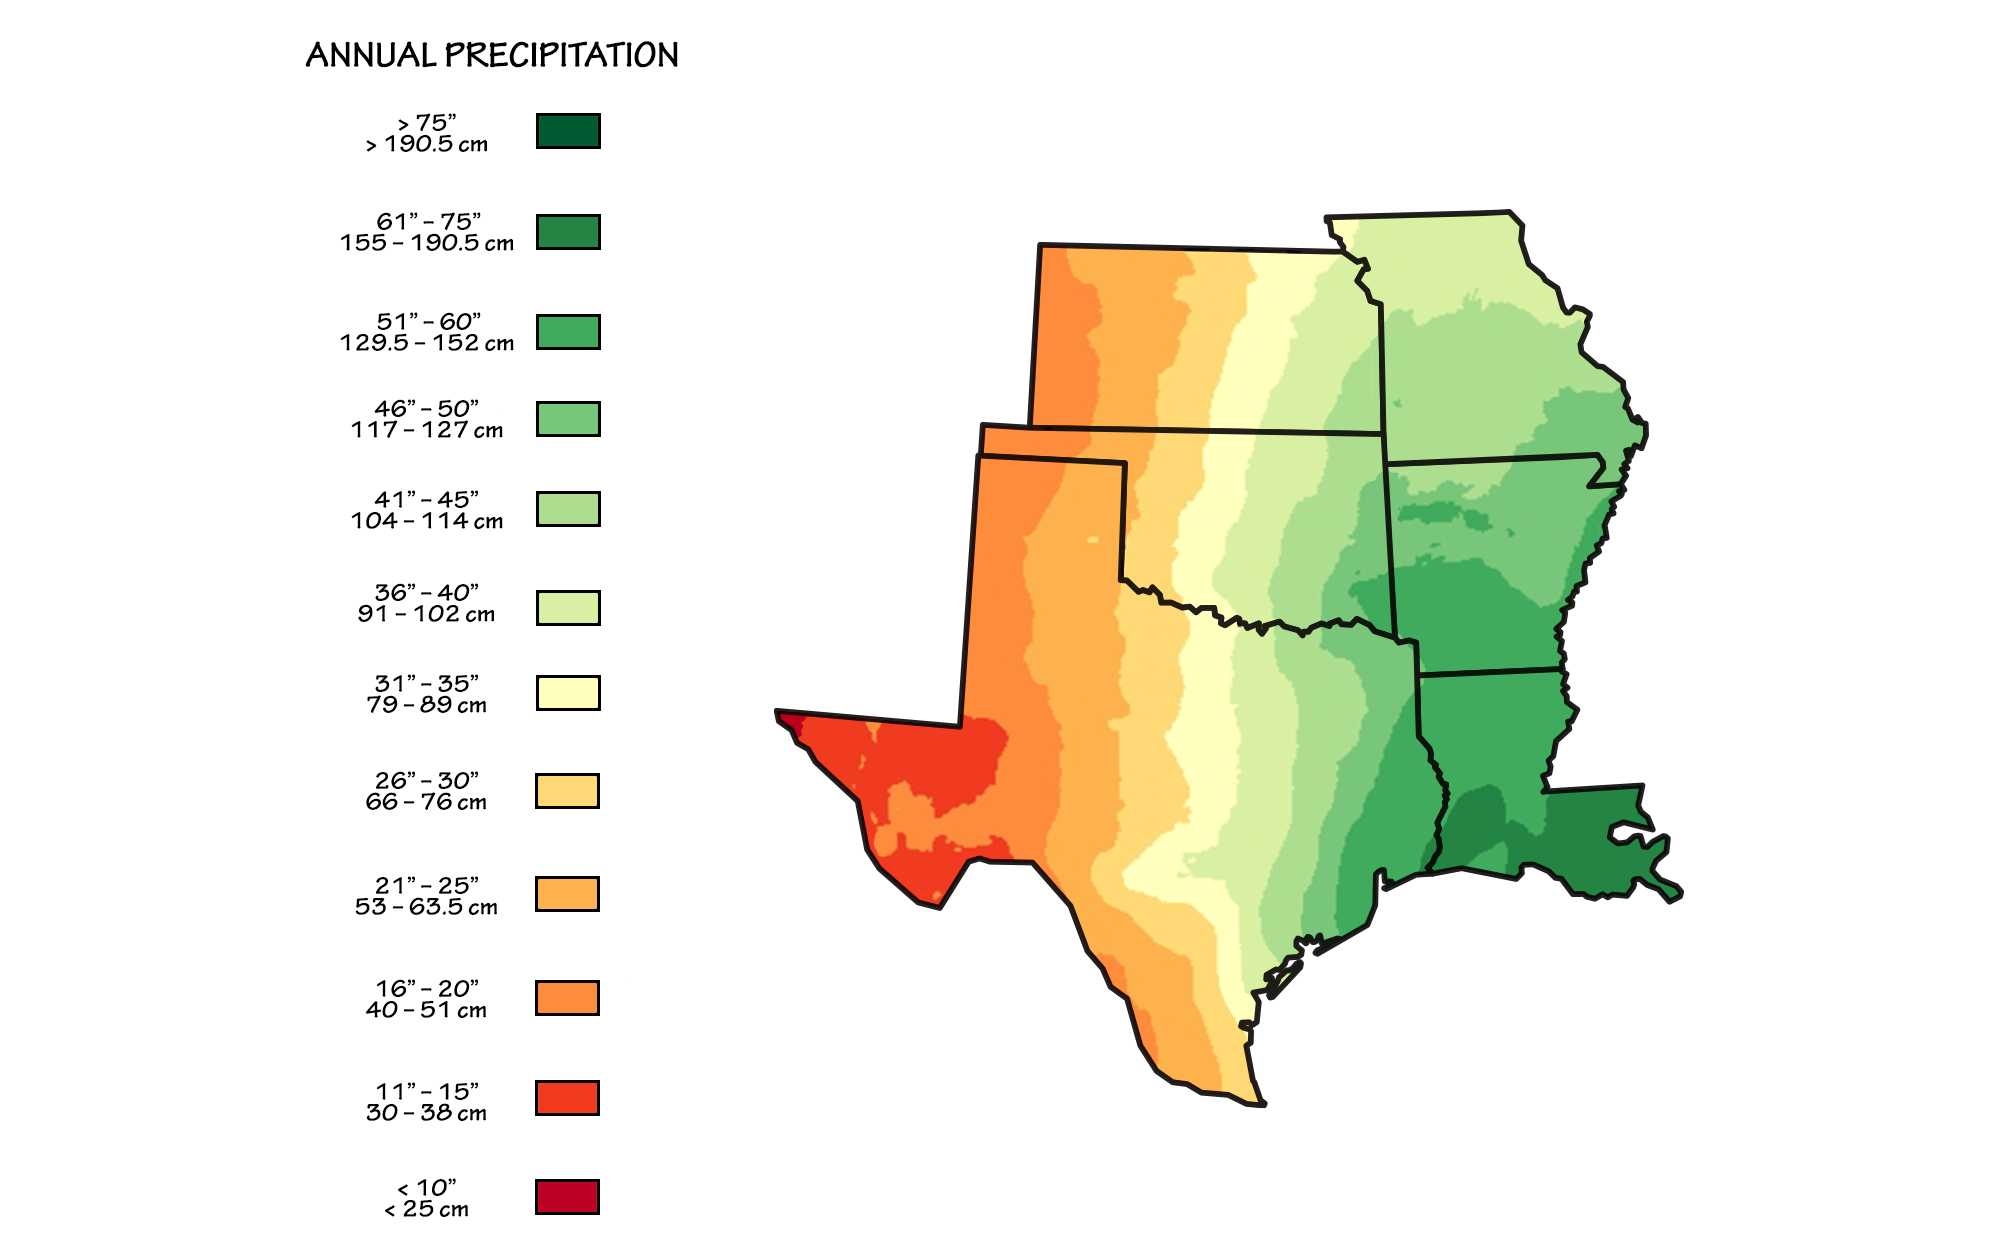 Map showing the south-central states with state borders marked. The map is shaded to show average annual precipitation. Precipitation is lowest in western Texas at less than 10 inches (less than 25 centimeters) per year. It is highest in southeastern Louisiana at over 75 inches (over 190.5 centimeters) per year. The gradient is driest in the west, wetter in the east, and wettest in the southeast.